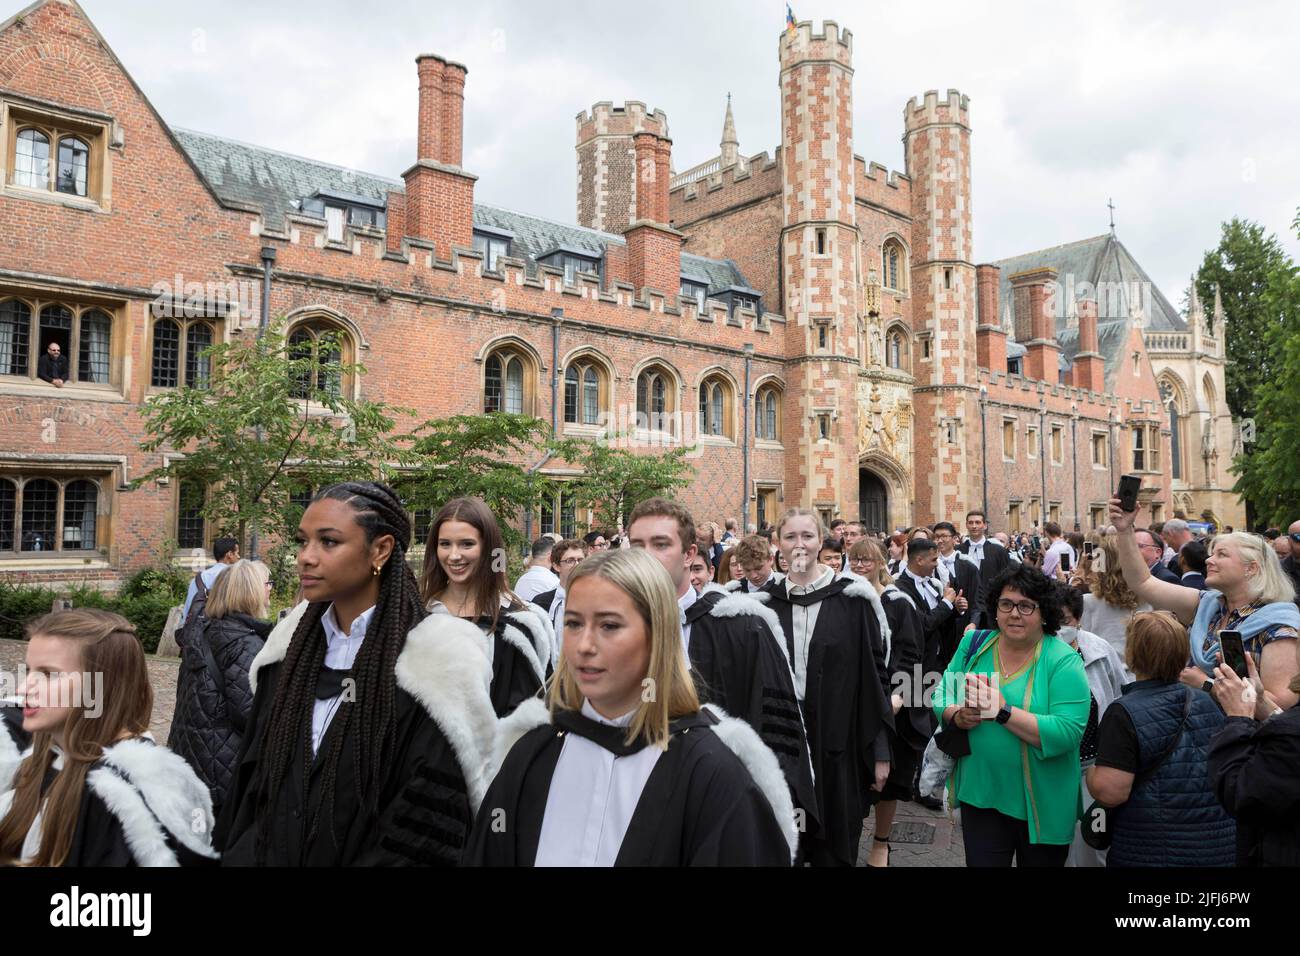 Cambridge graduates from Trinity College leave their college to attend the graduation ceremony this morning at Senate House.   Image shot on 29th June Stock Photo